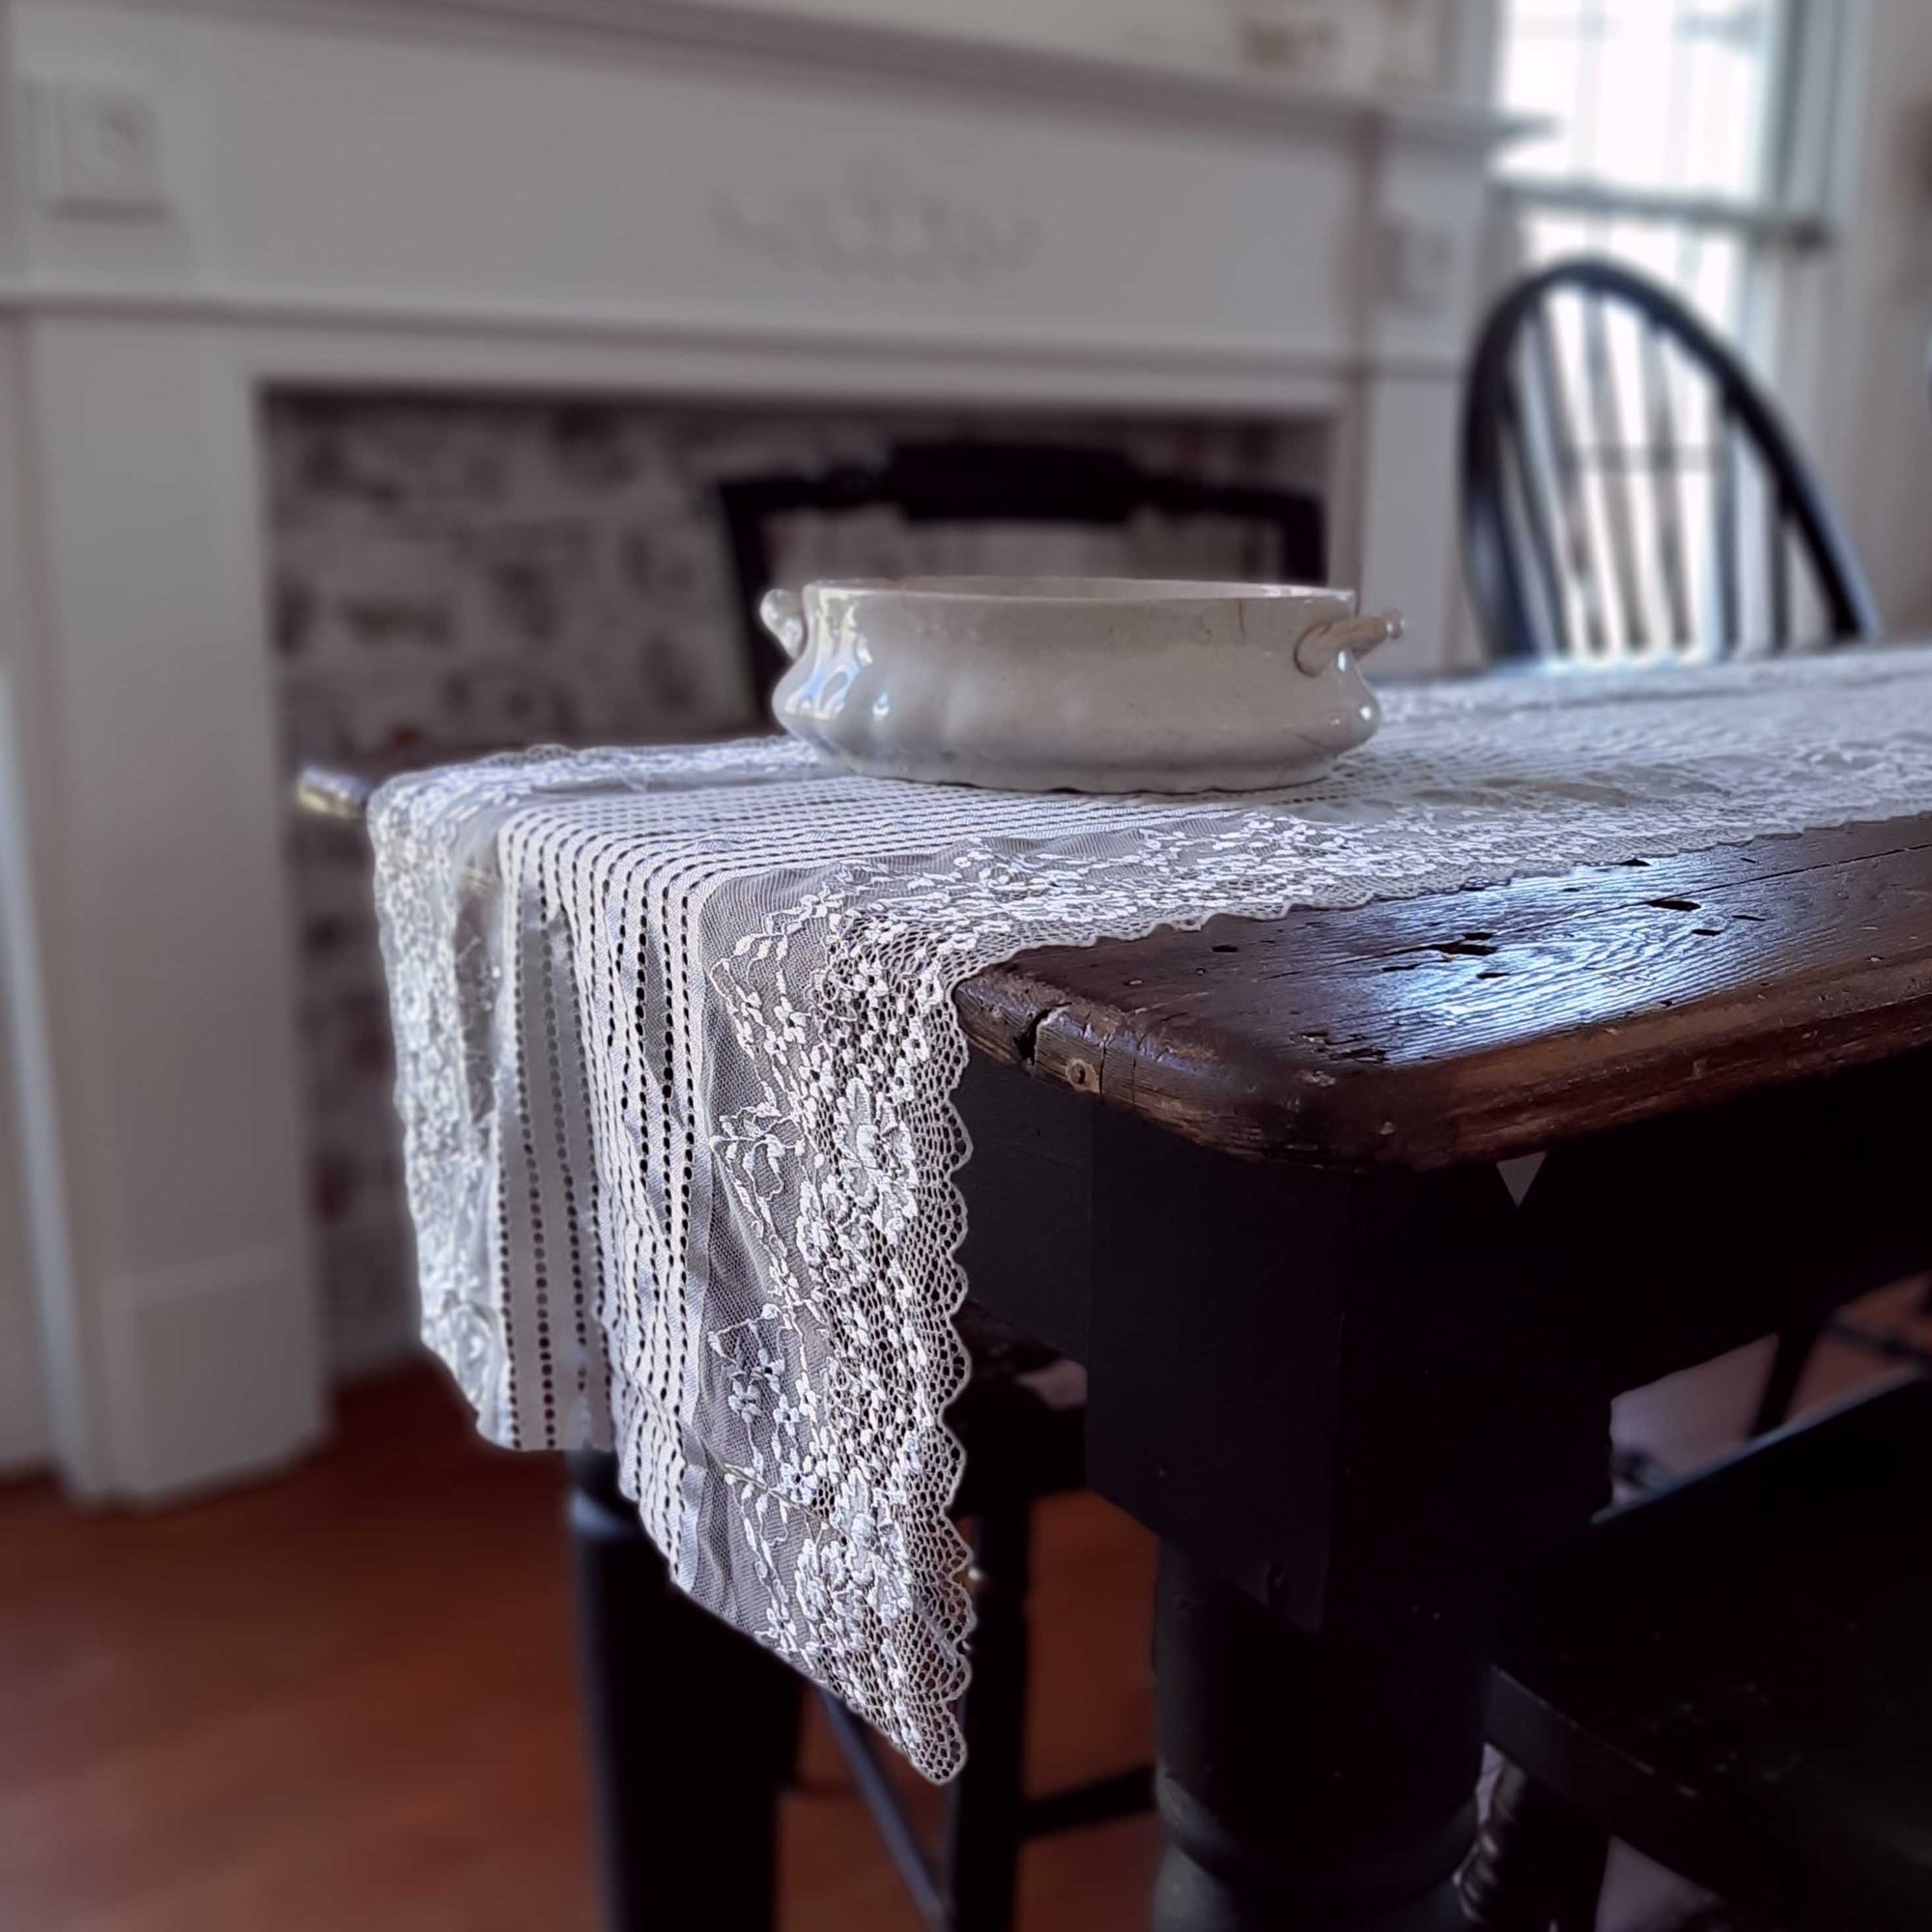 Our Old-World Lace Table Runner adds a light and breezy touch of elegance to your home. This sheer lace runner has a dreamy quality and creates instant vintage charm that is perfect for country cottage living. Translucent white lace is embroidered with a floral design along the edges with stripes down the center. Blend of cotton, linen and polyester. 15.7”W x 78.7”L